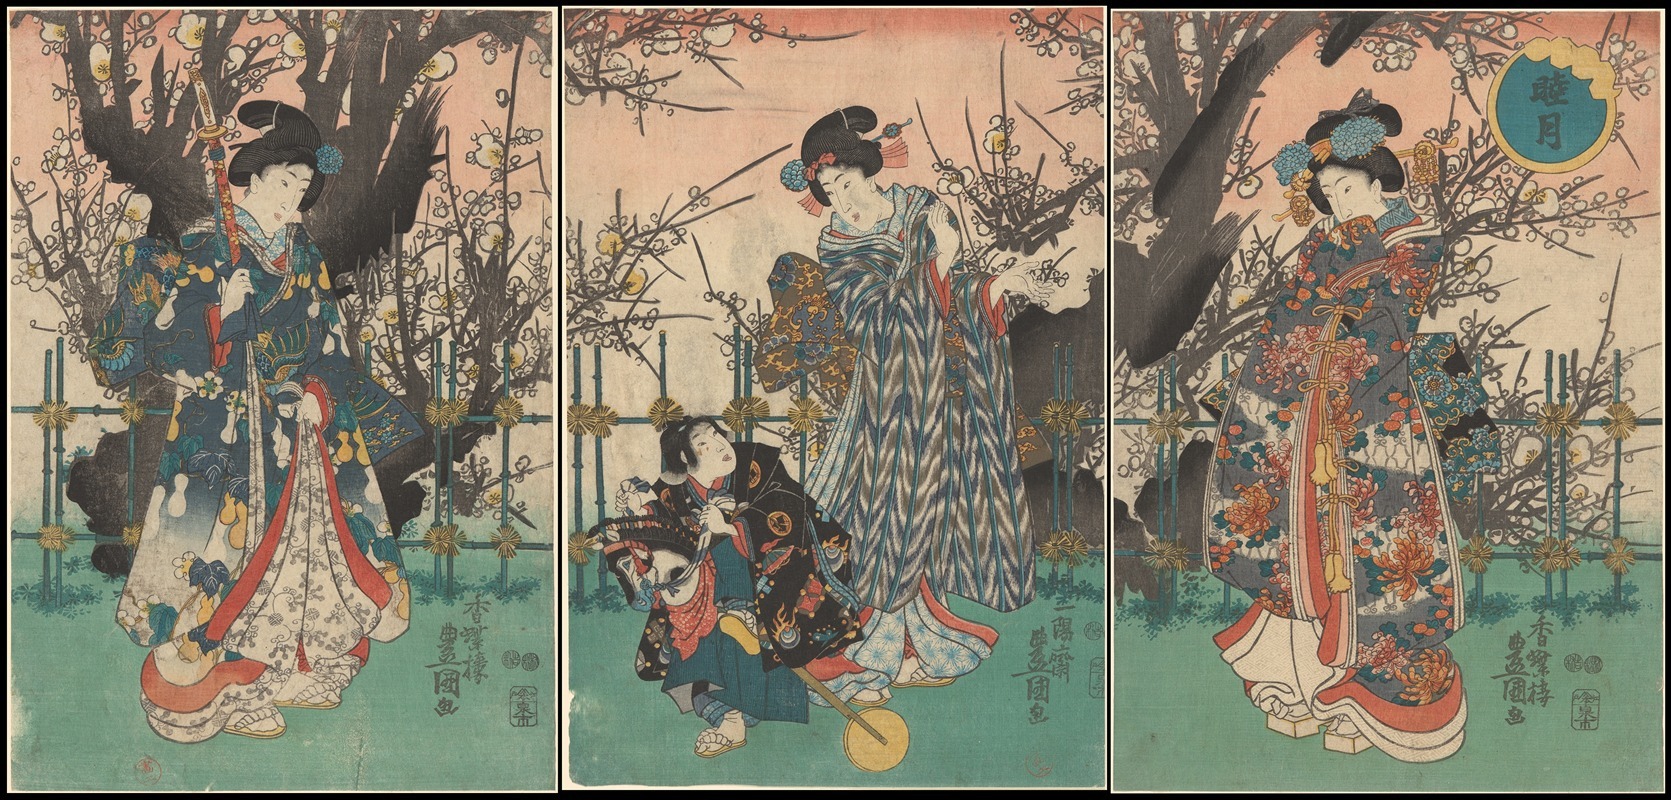 Utagawa Toyohiro - Old Cherry in Spring, Three Women and a Child with Hobby Horse Walking Past